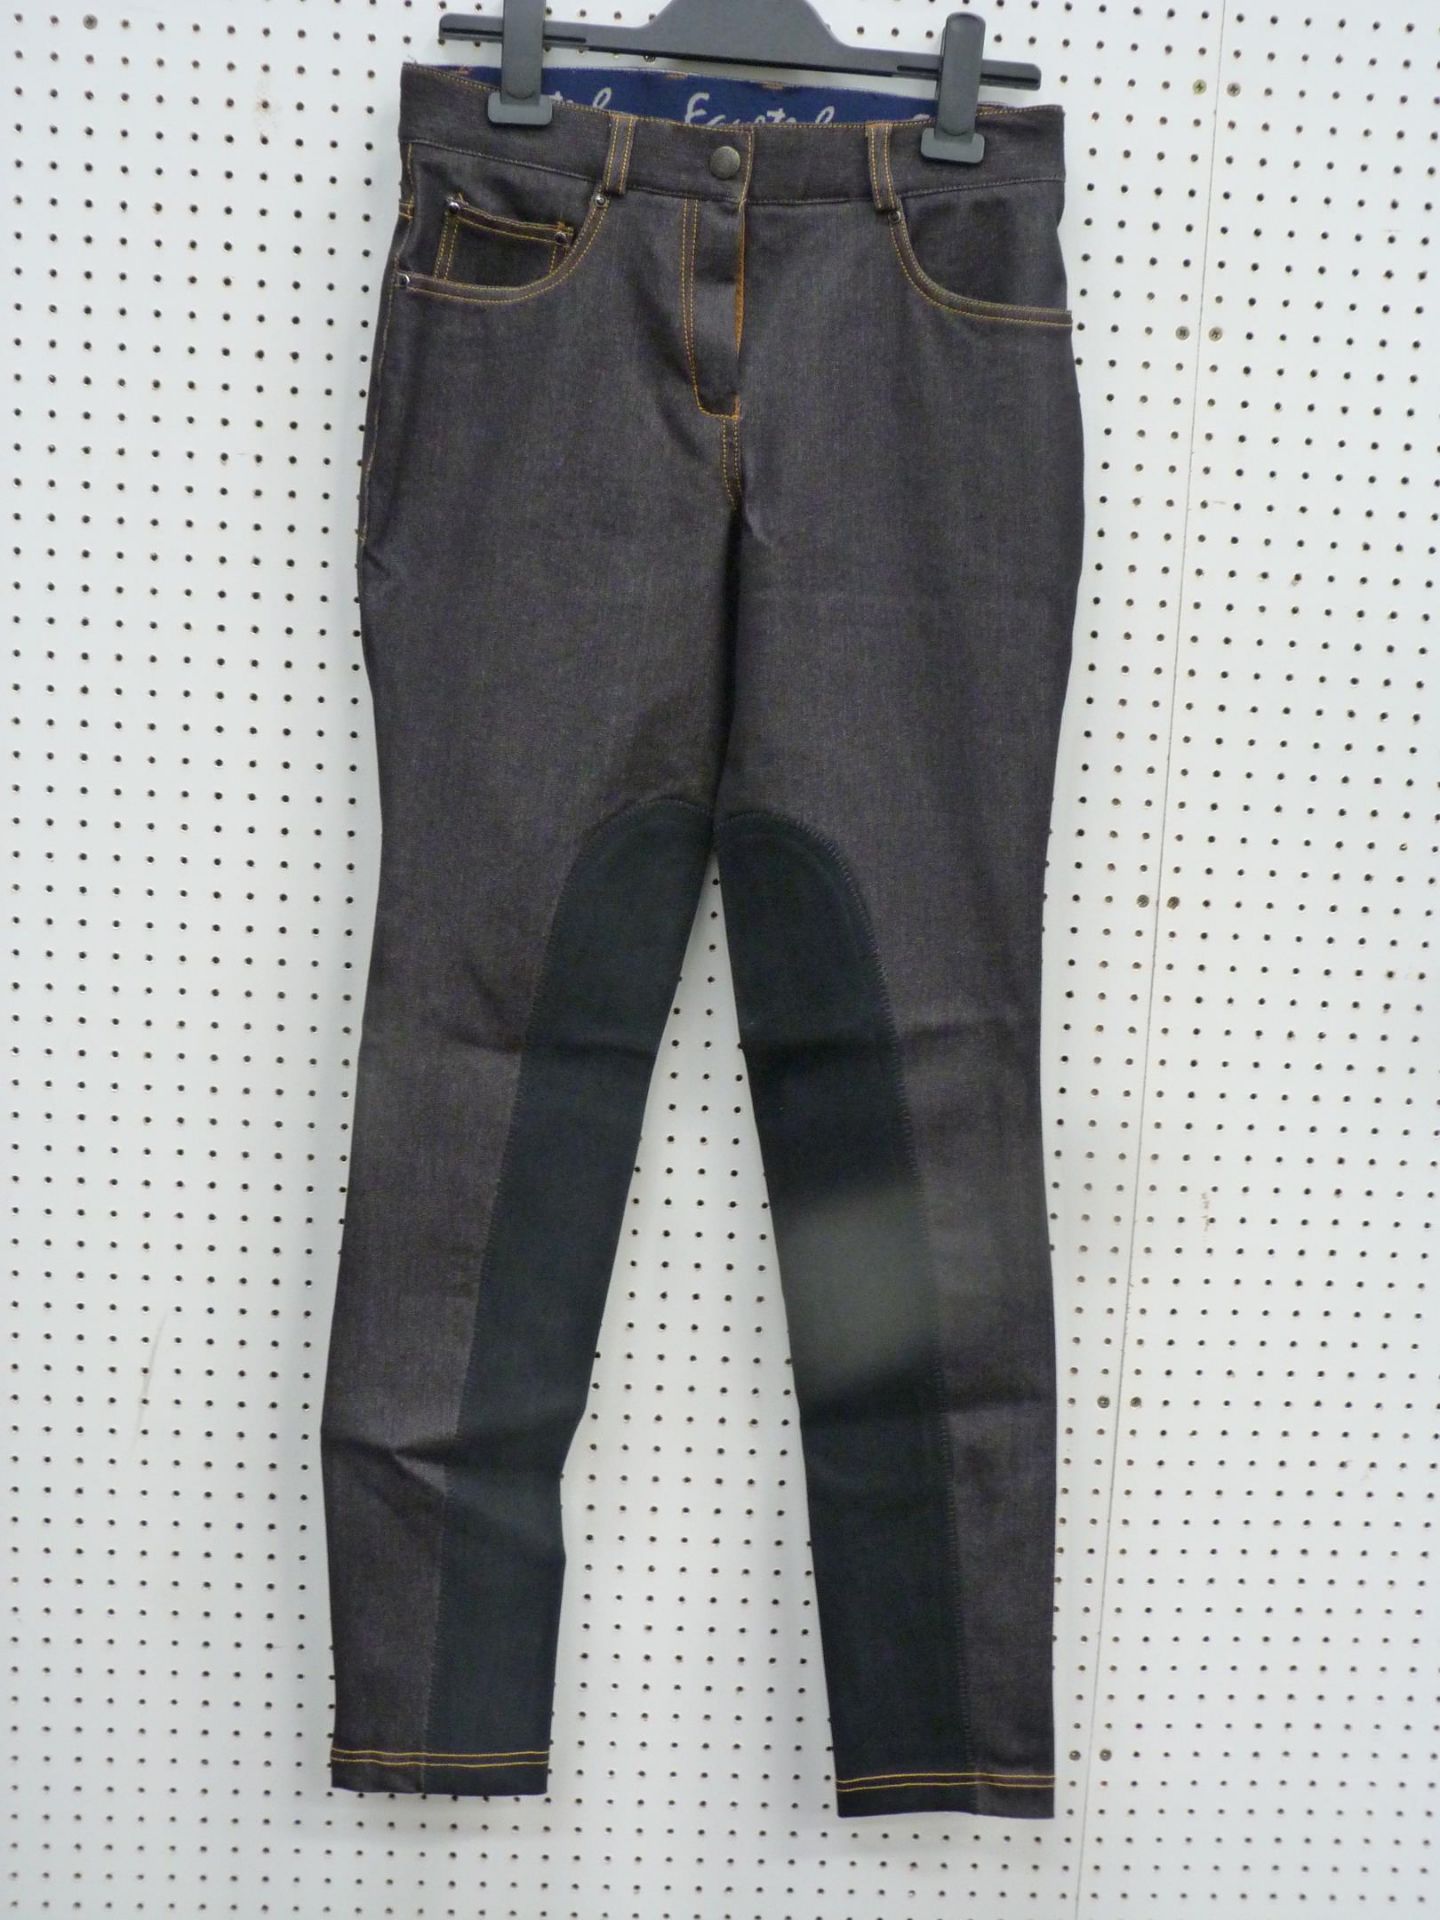 * Two Pairs of New Equatech Skinny Riding Jeans in Black Denim. One Pair size 8 long the other 16